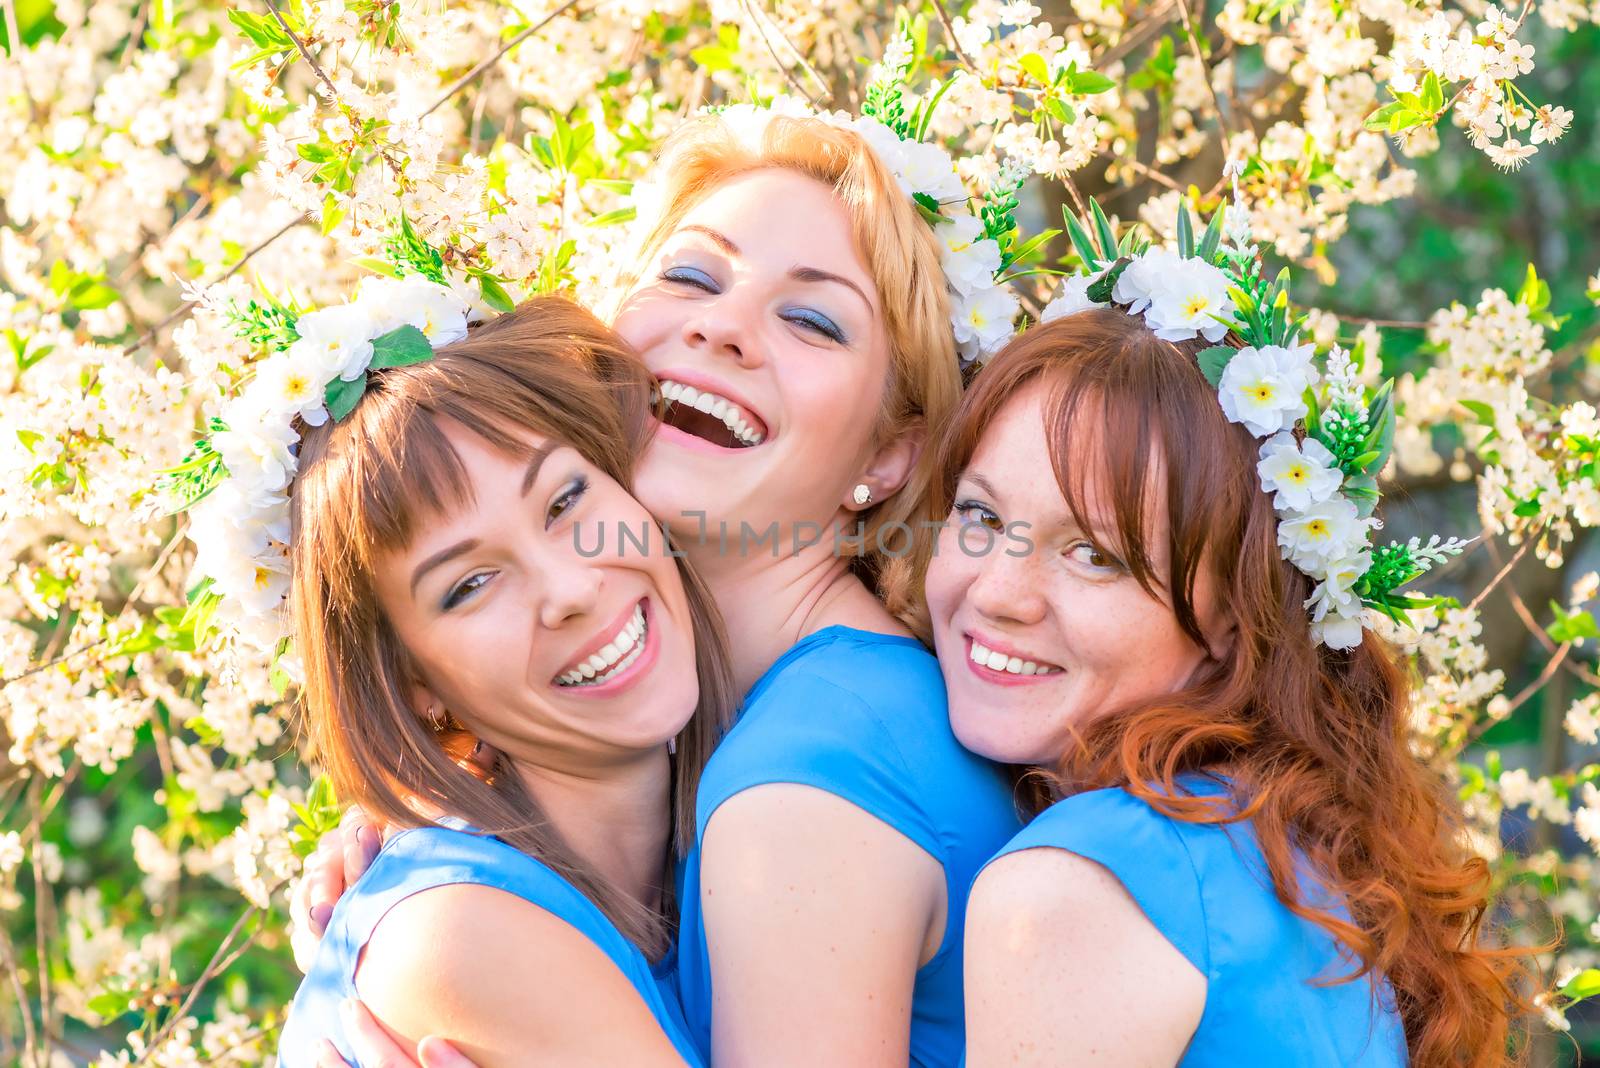 Three laughing girls in blue dresses in the lush spring garden